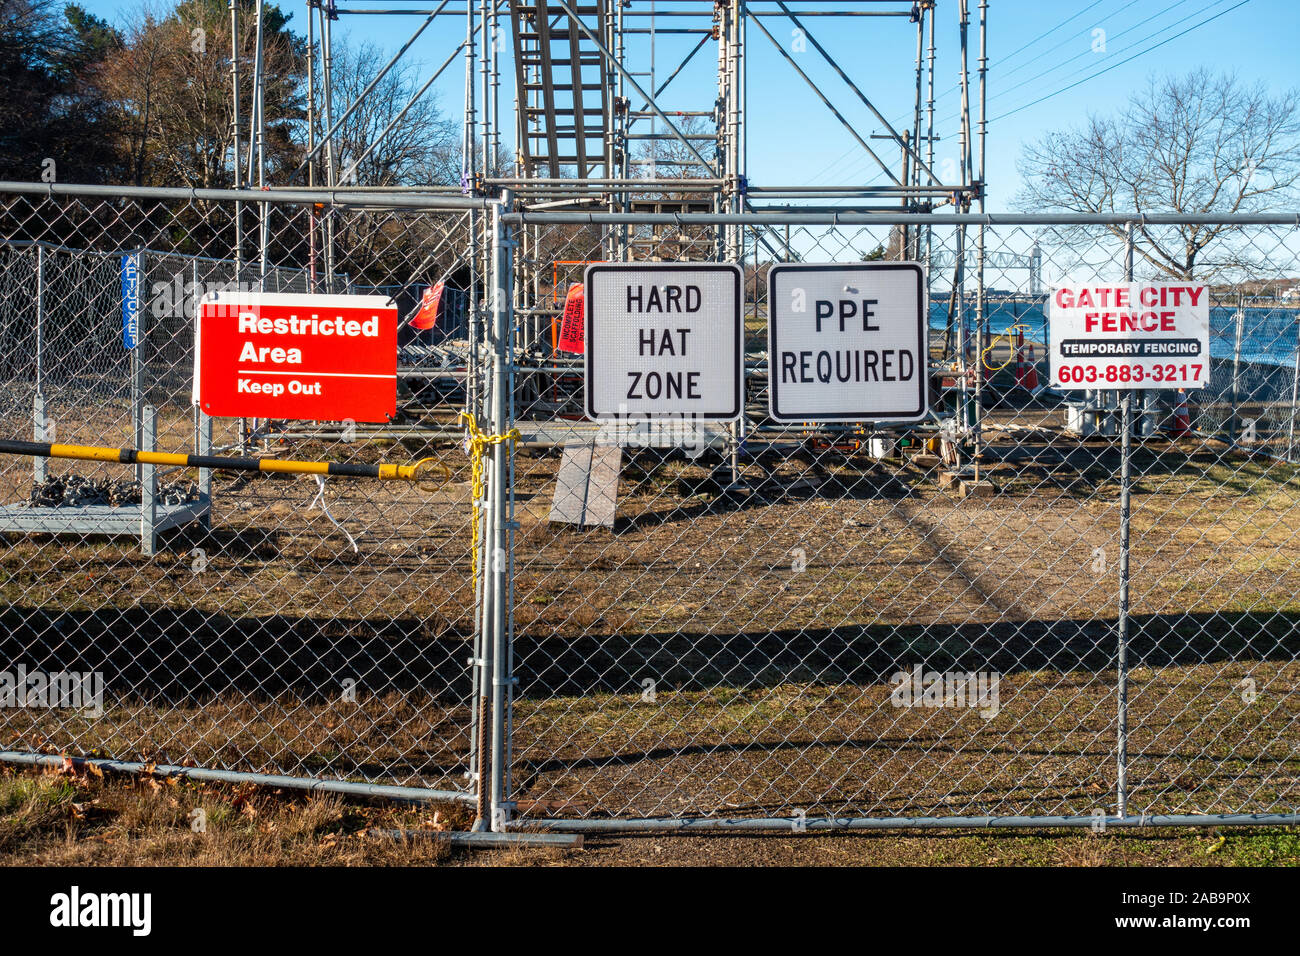 Restricted Area Keep Out, Hard Hat Area, PPE Required signs on chain link fence at construction site by Gate City Fence Temporary Fencing Stock Photo